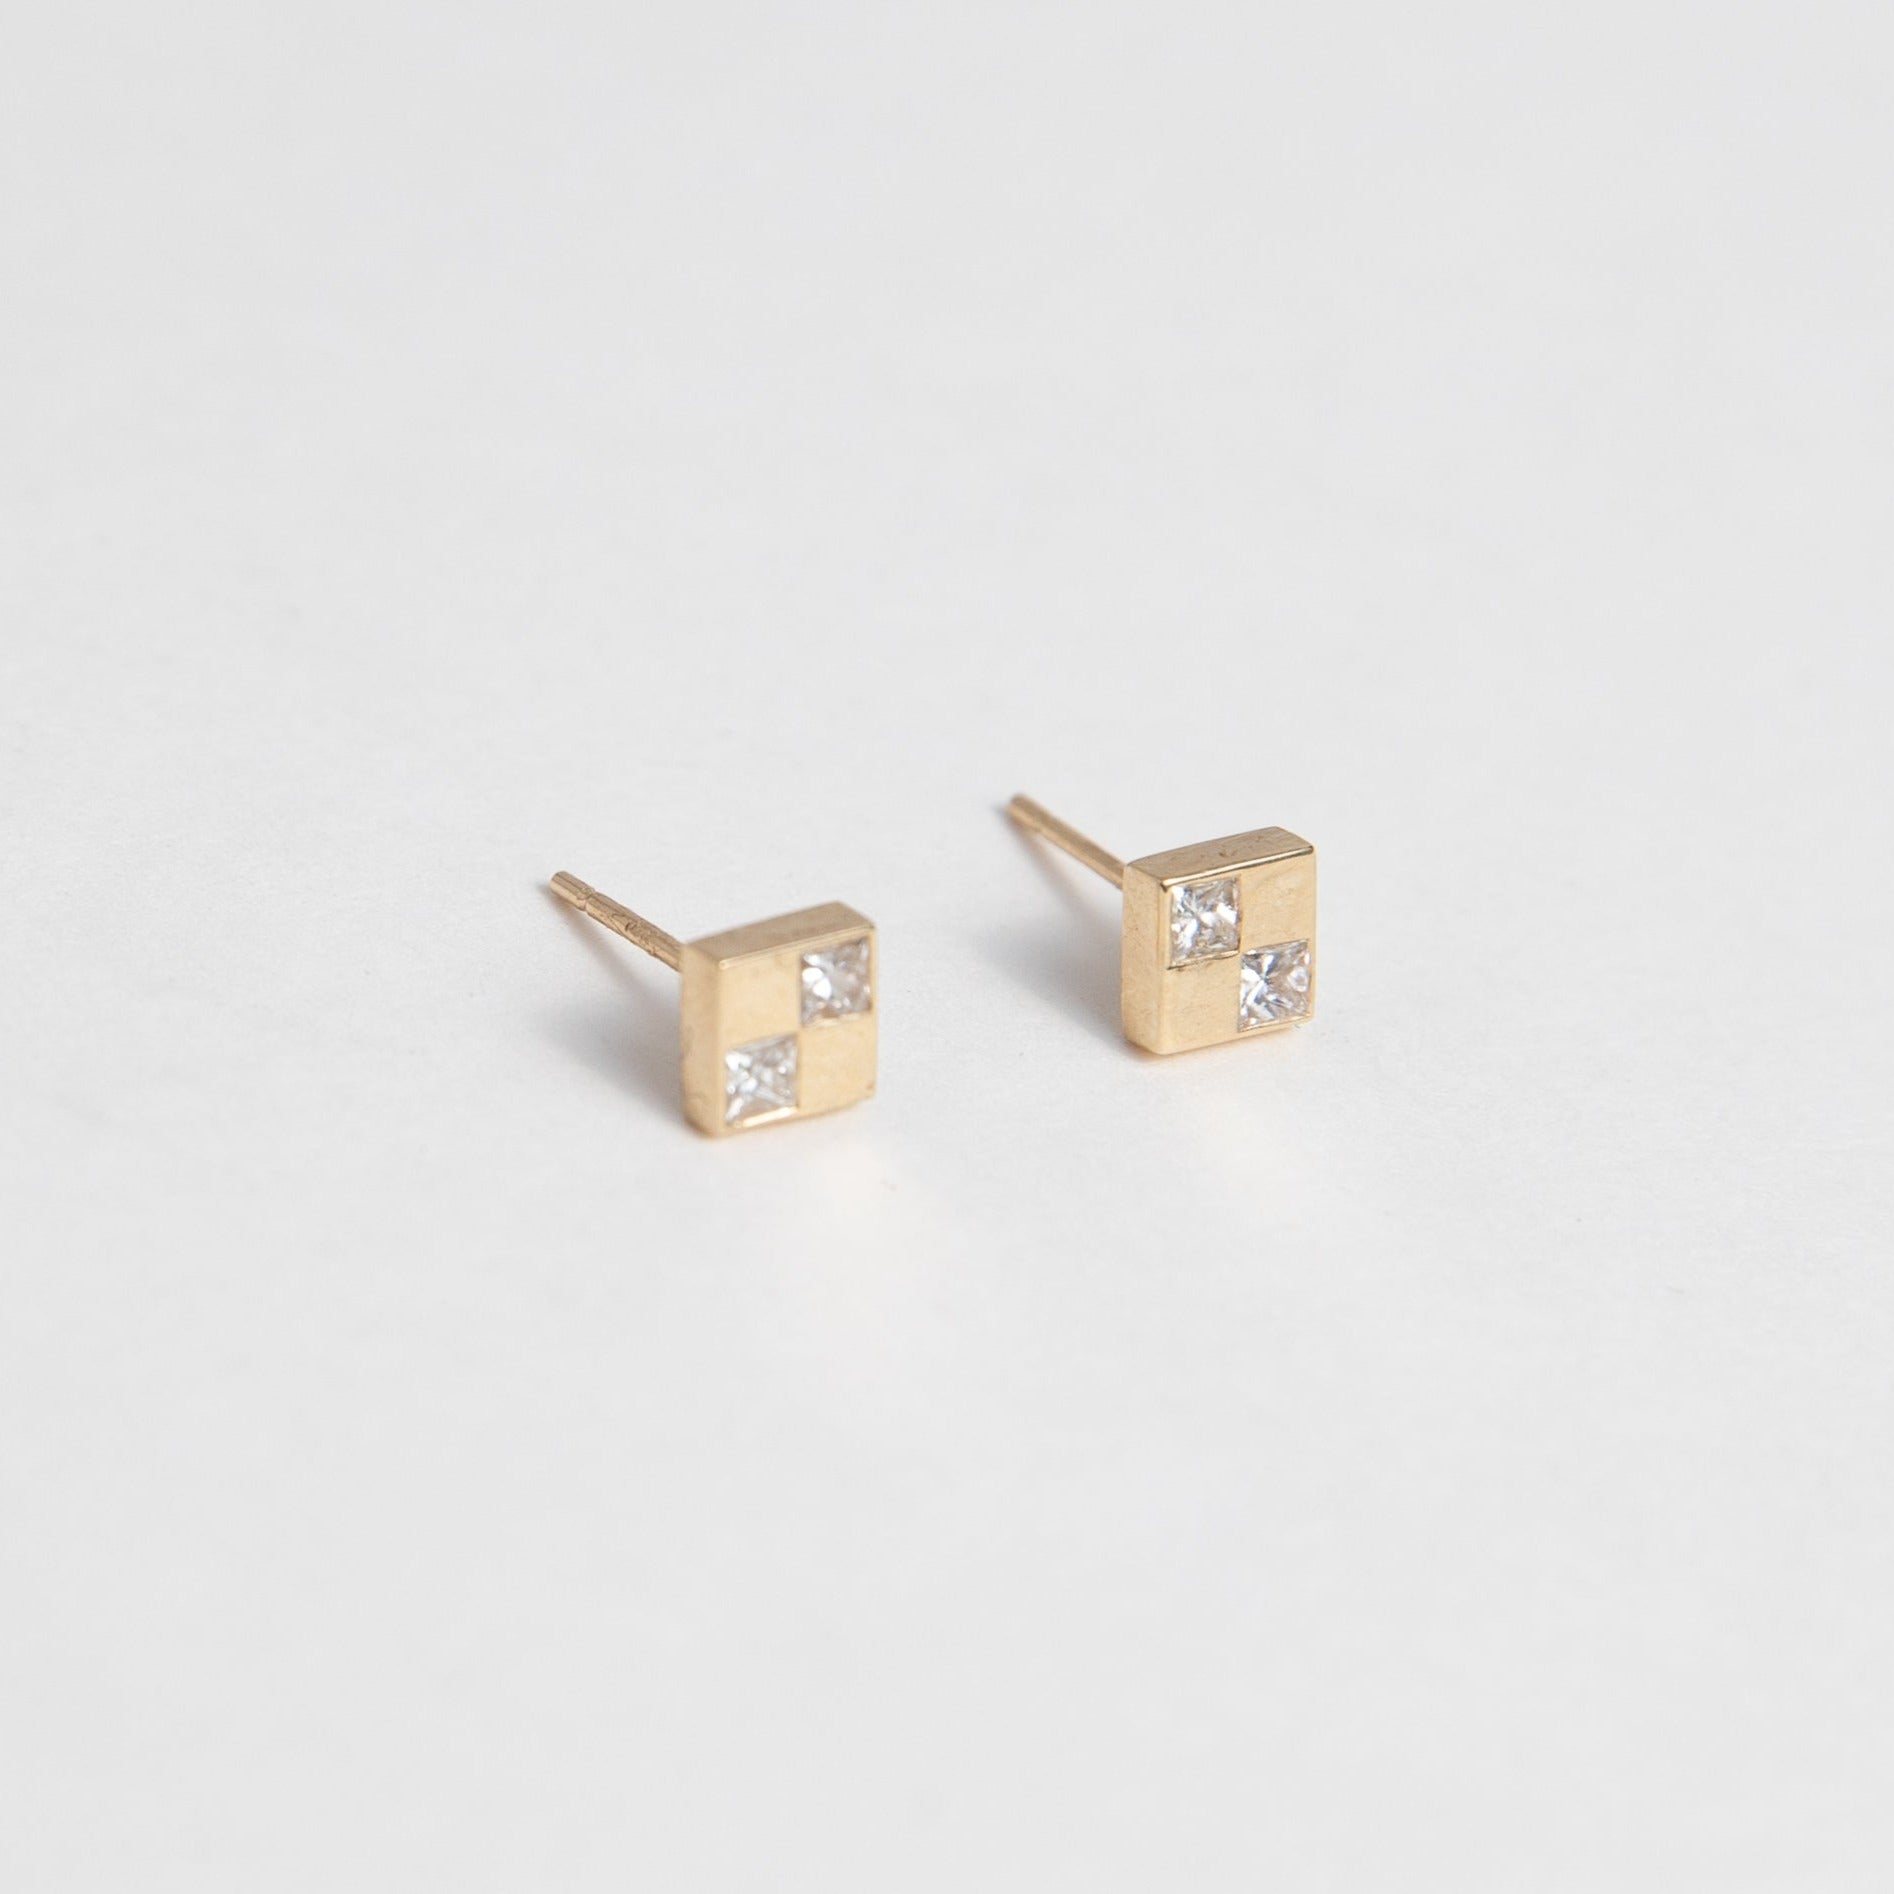 Minimal Sudu Stud Earrings in 14k Yellow Gold and Natural White Diamonds by SHW fine Jewelry in NYC